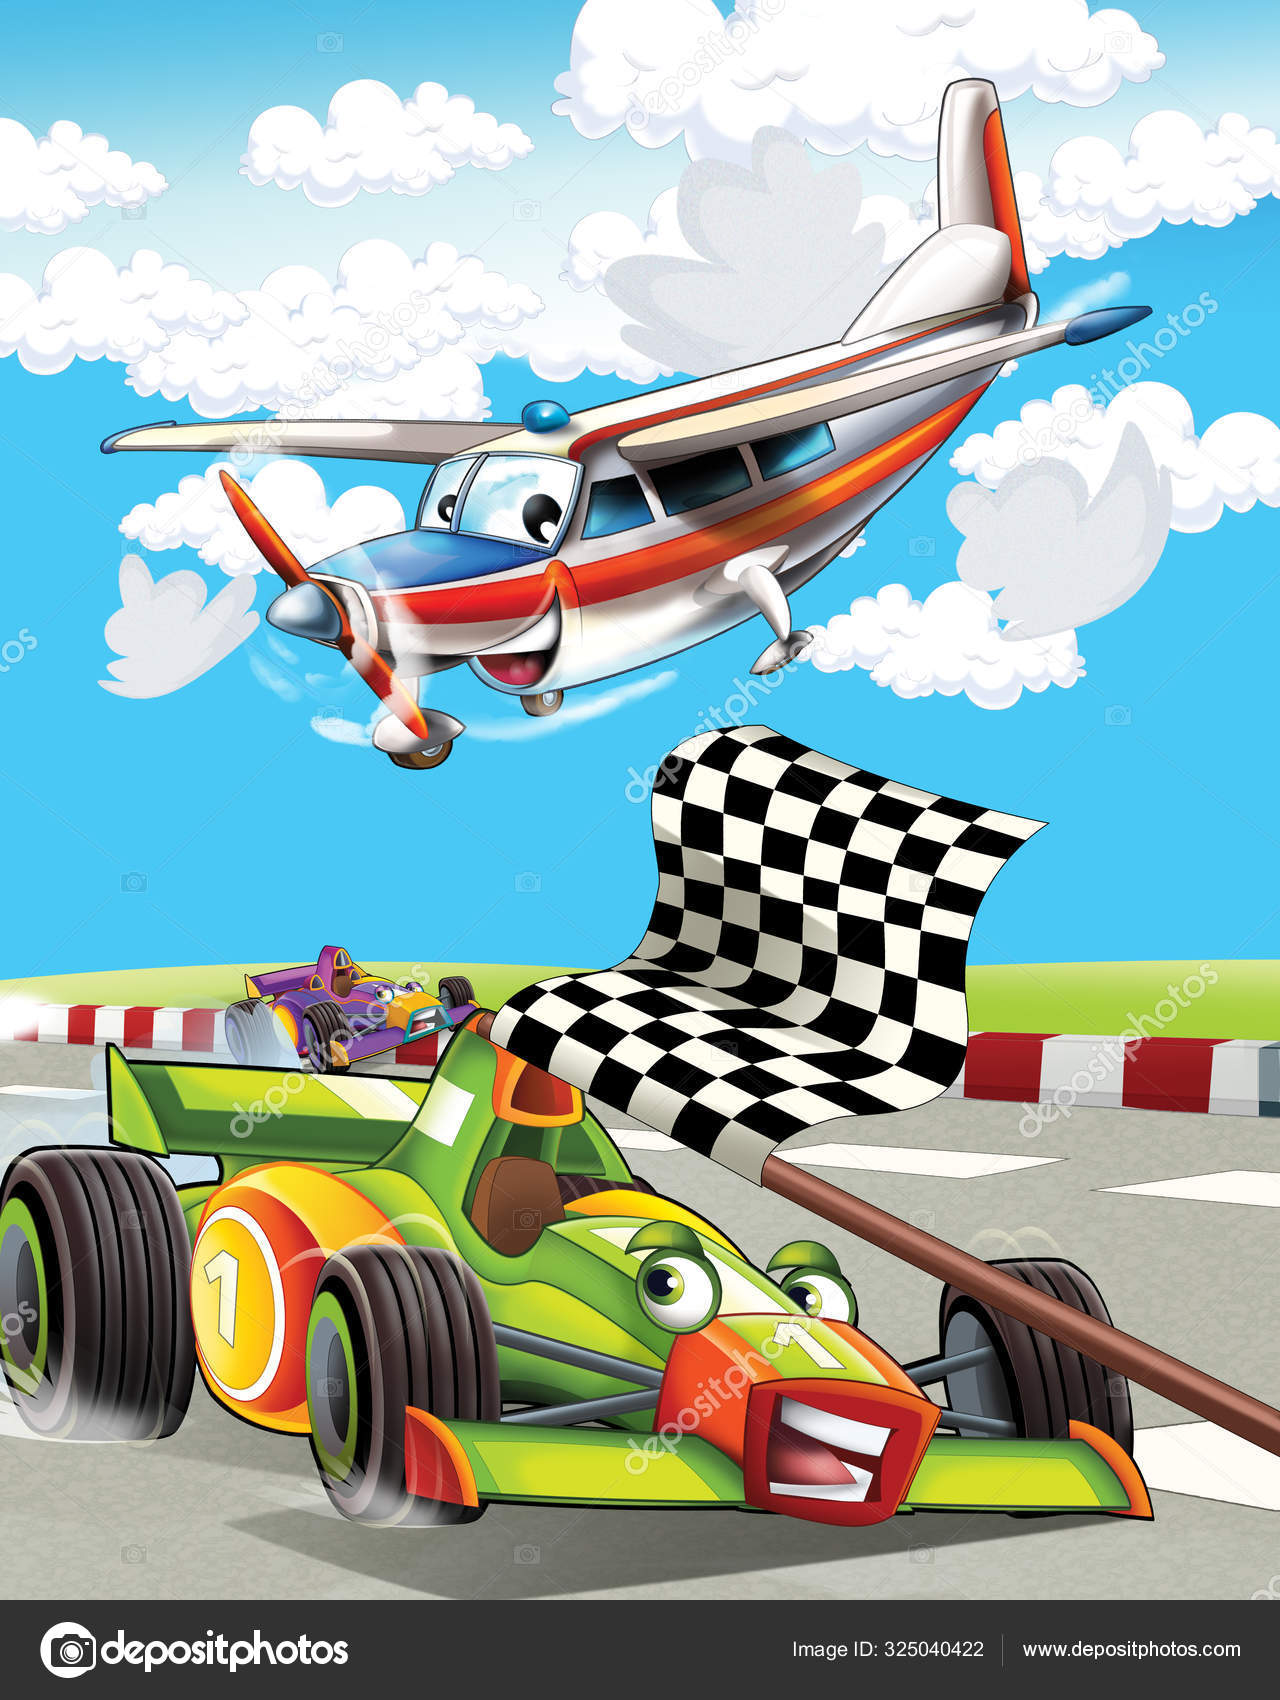 Cartoon scene with super car racing and observing plane is flying over -  illustration for children Stock Photo by ©illustrator_hft 325040422